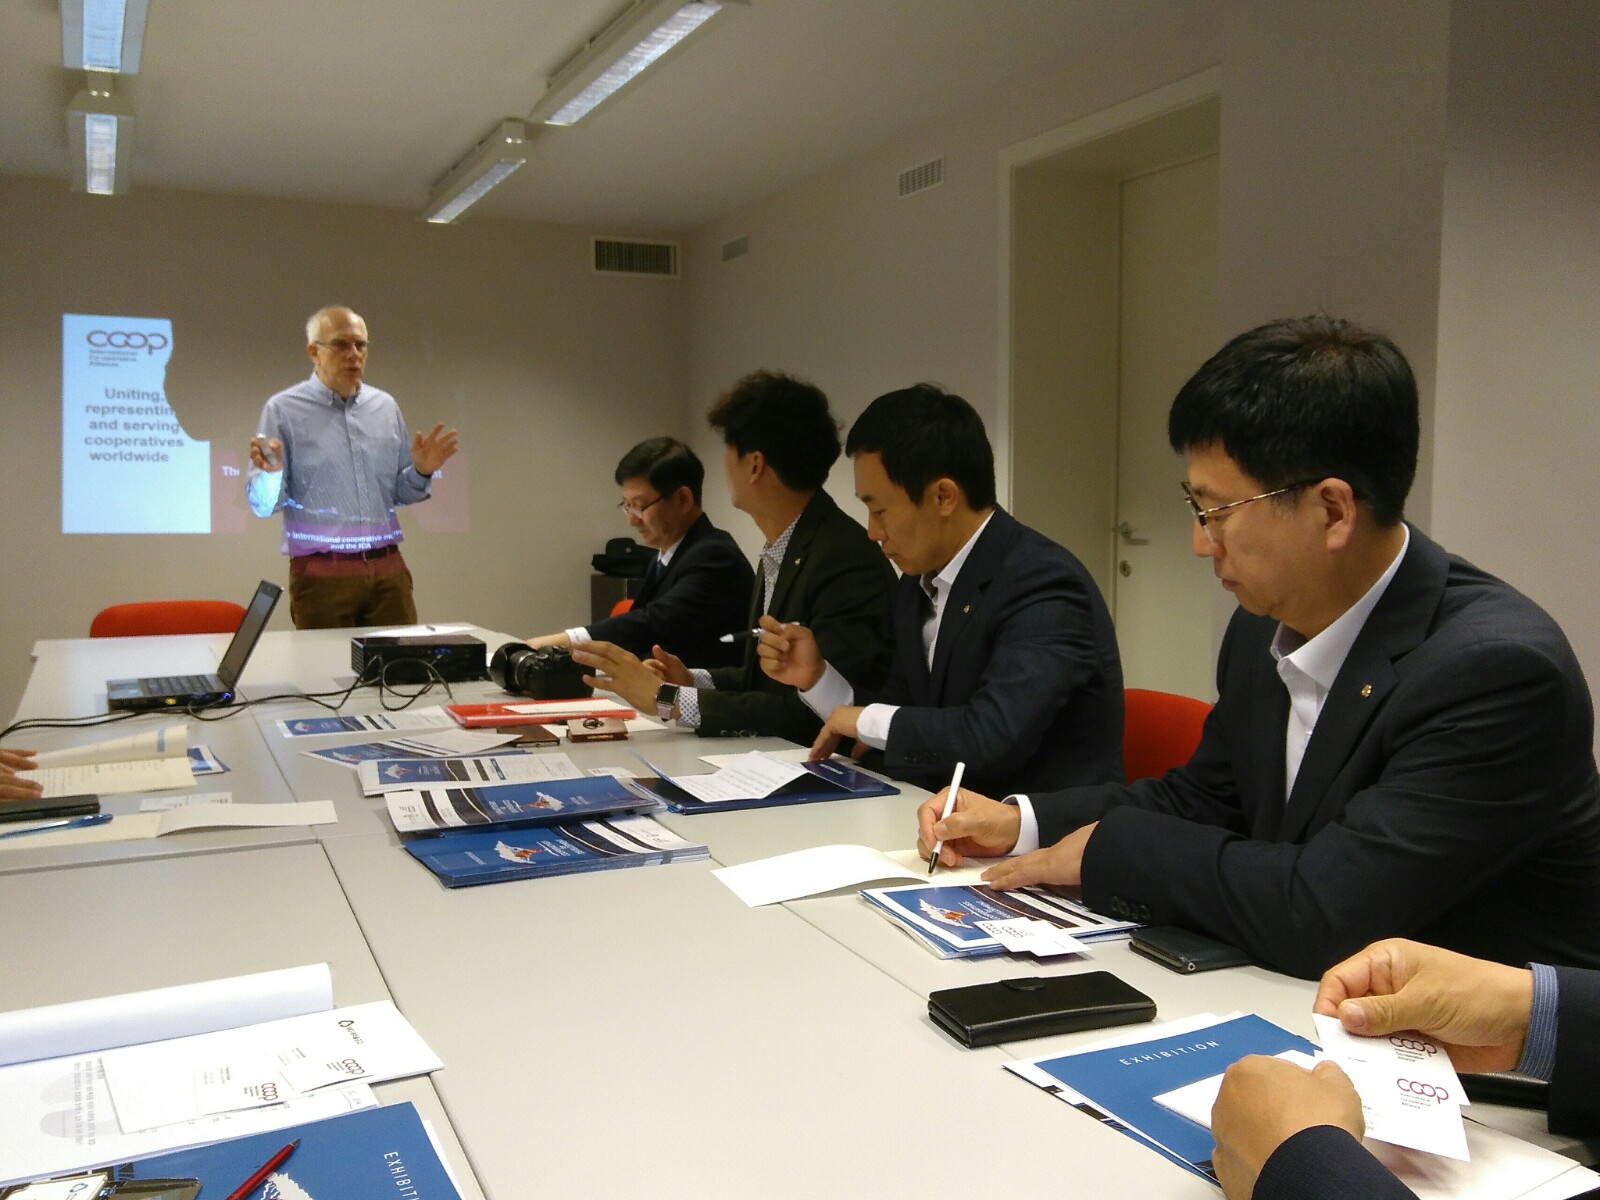 Korean cooperative leaders at the Cooperative House in Brussels